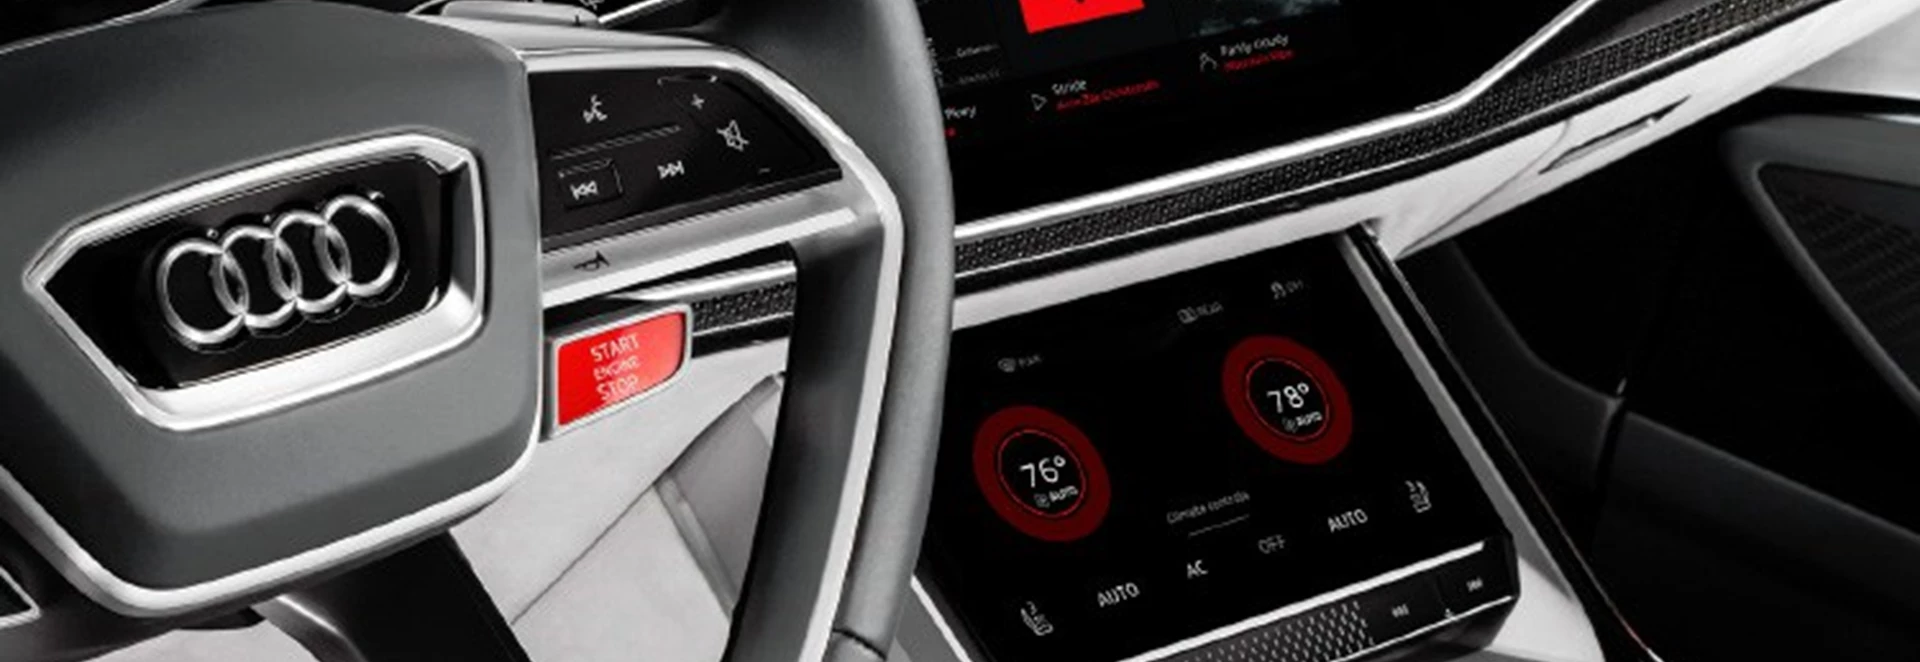 Android-powered cars coming from Audi and Volvo